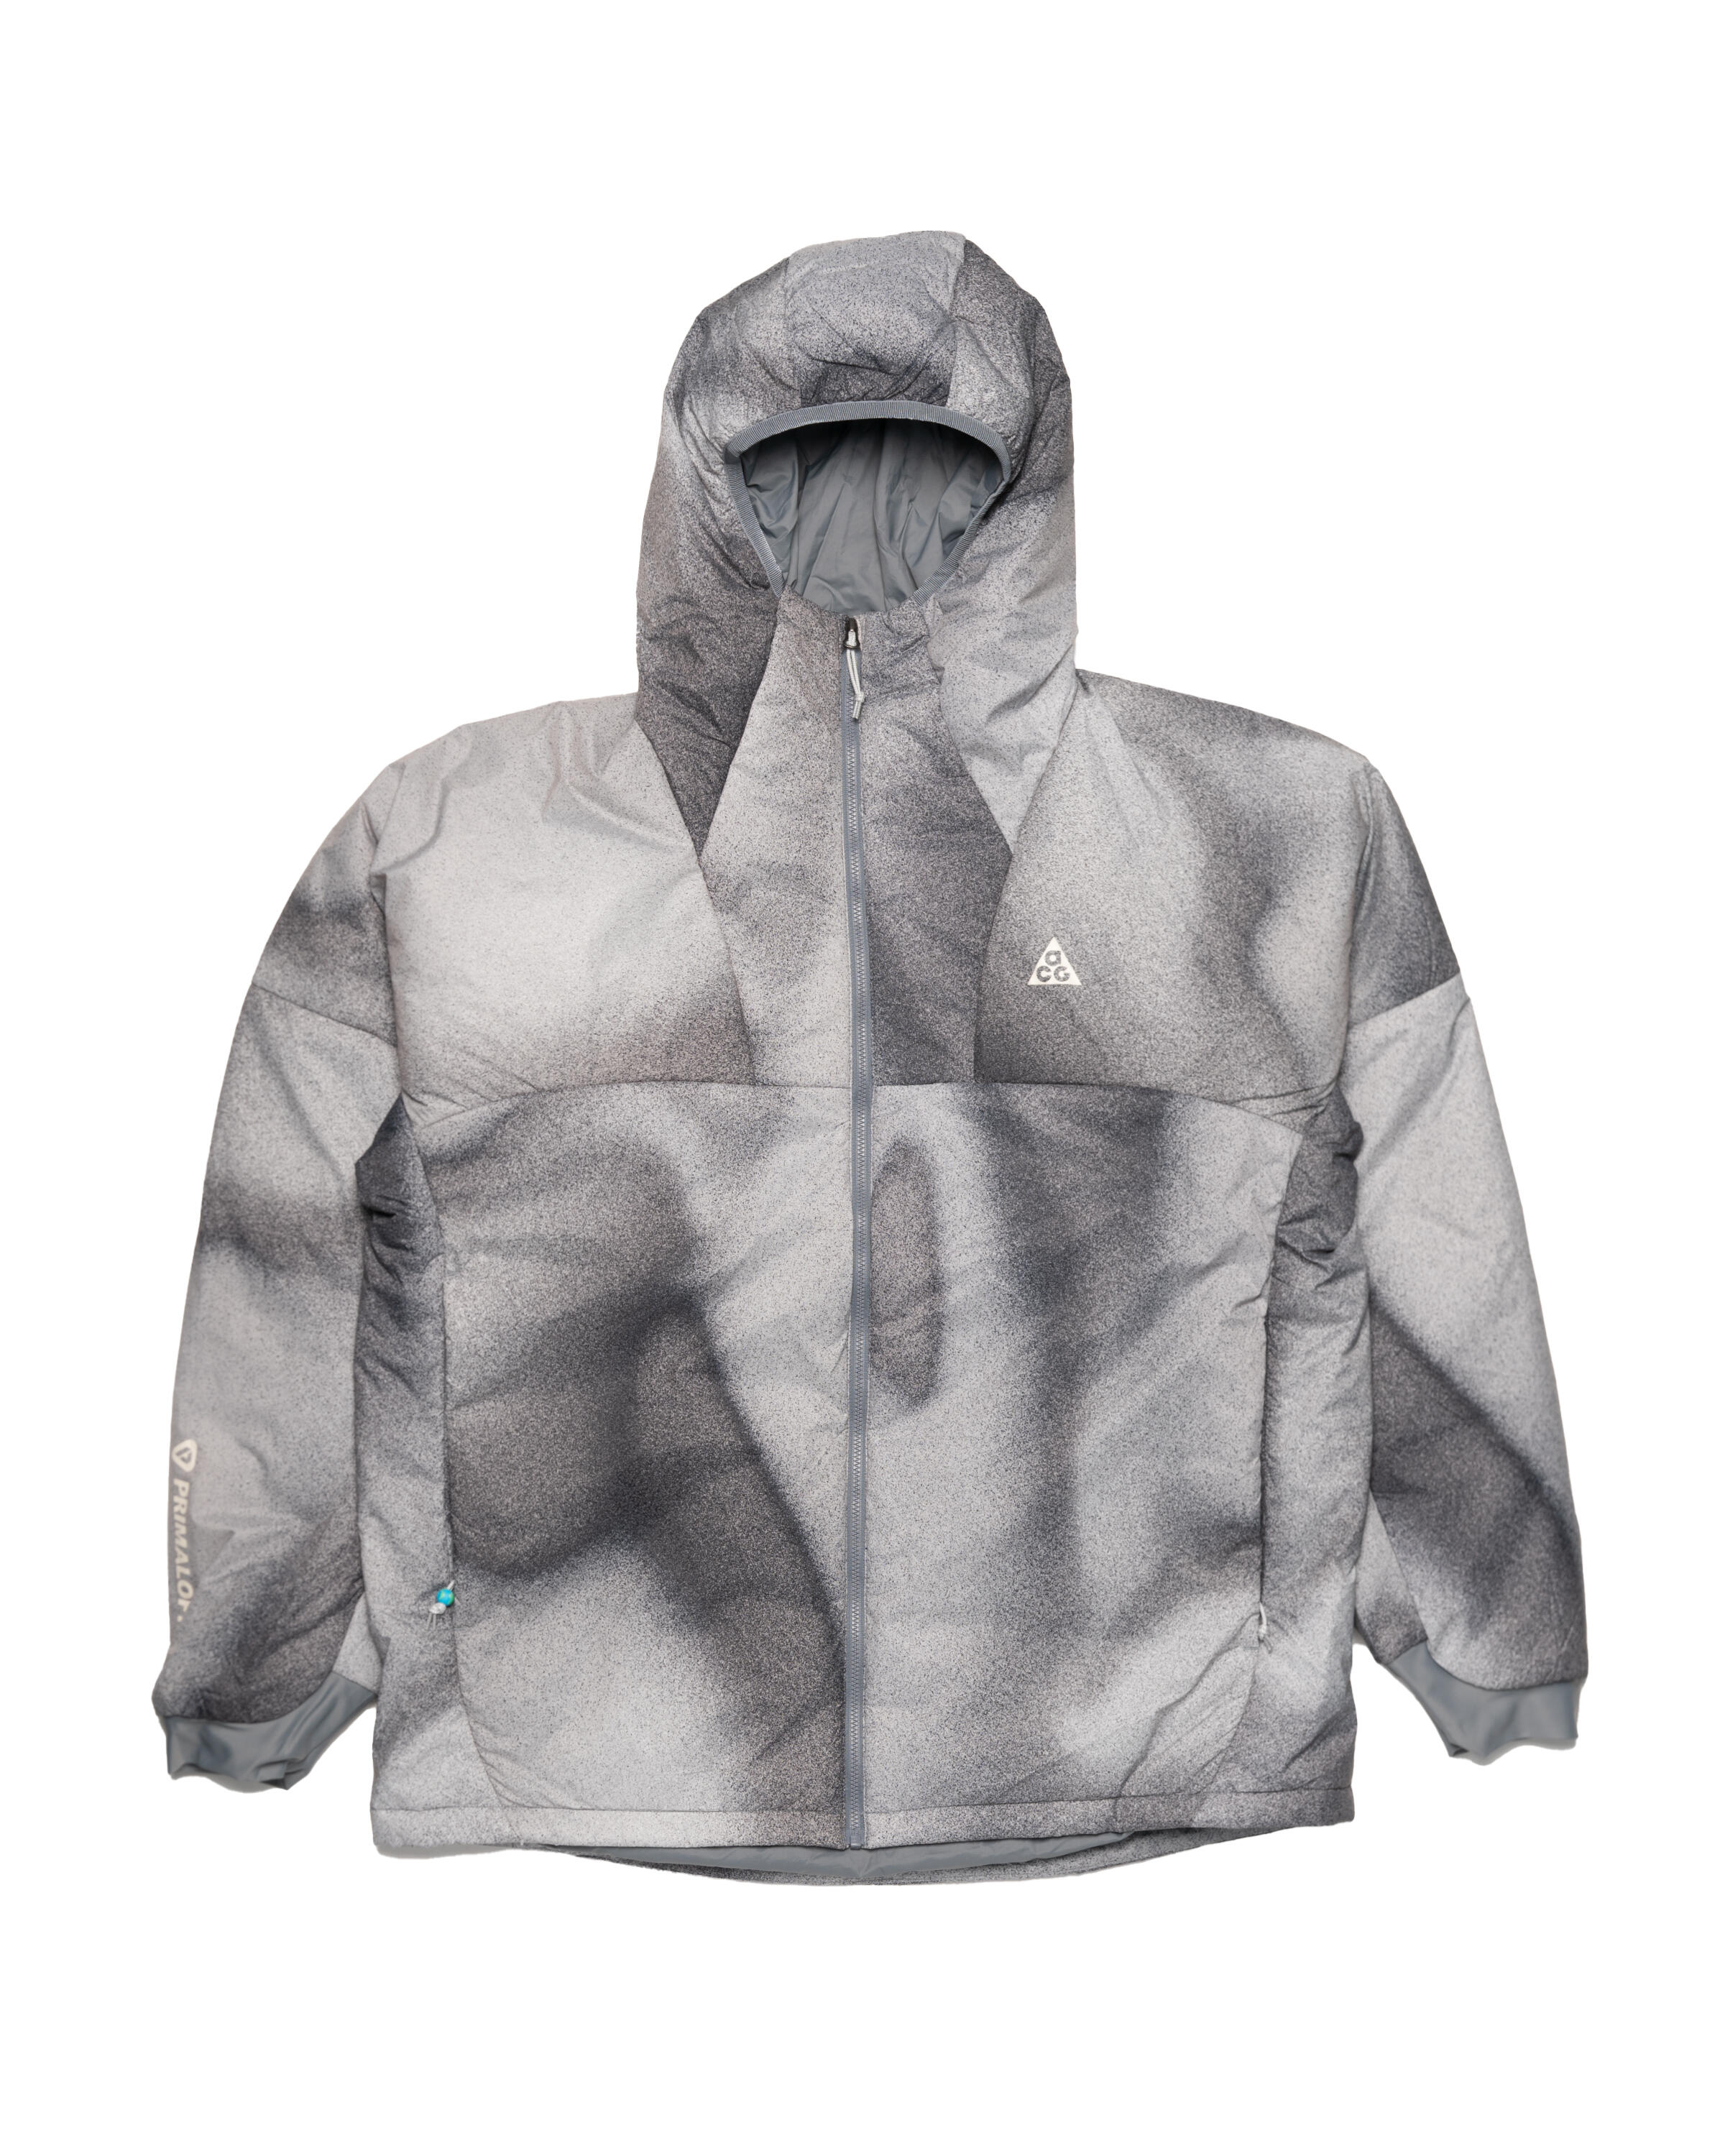 nike acg therma-fit adv "rope de dope" jacket